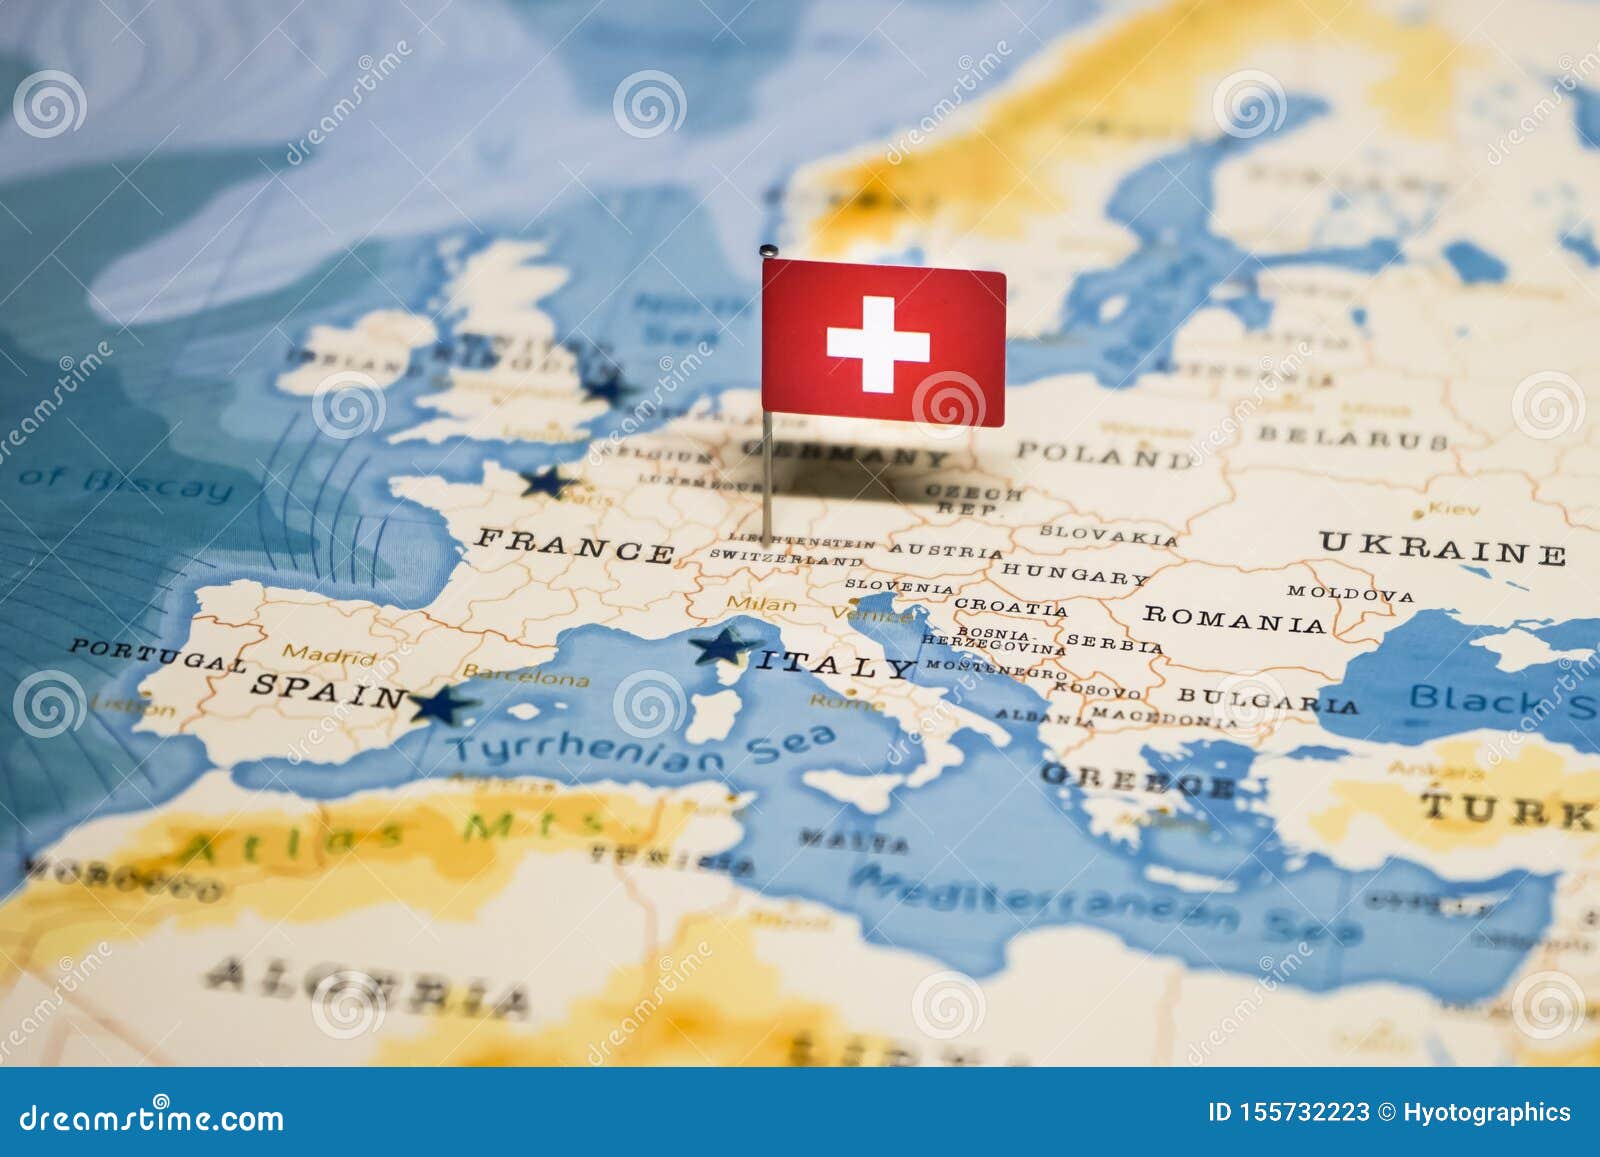 The Flag Of Switzerland In The World Map Stock Image ...